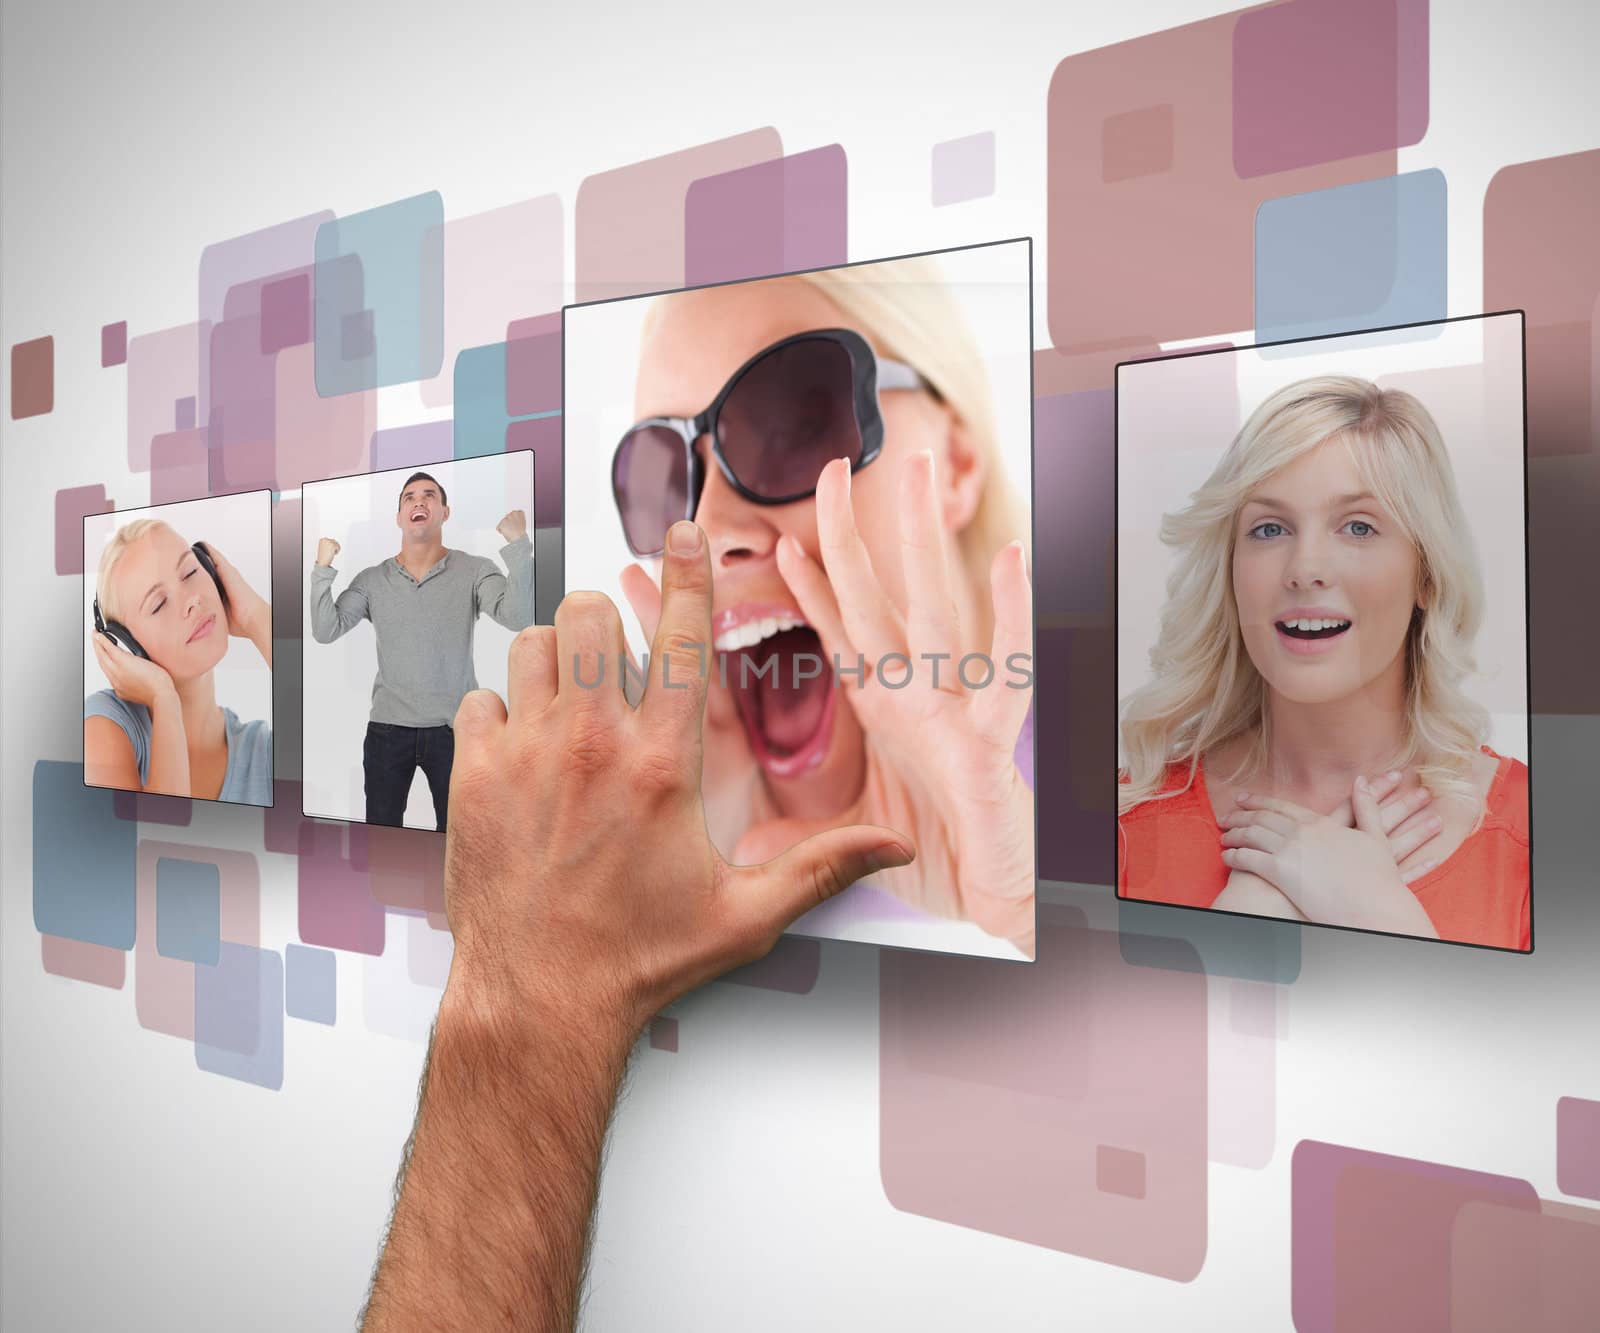 Male hand selecting photo from digital wall by Wavebreakmedia